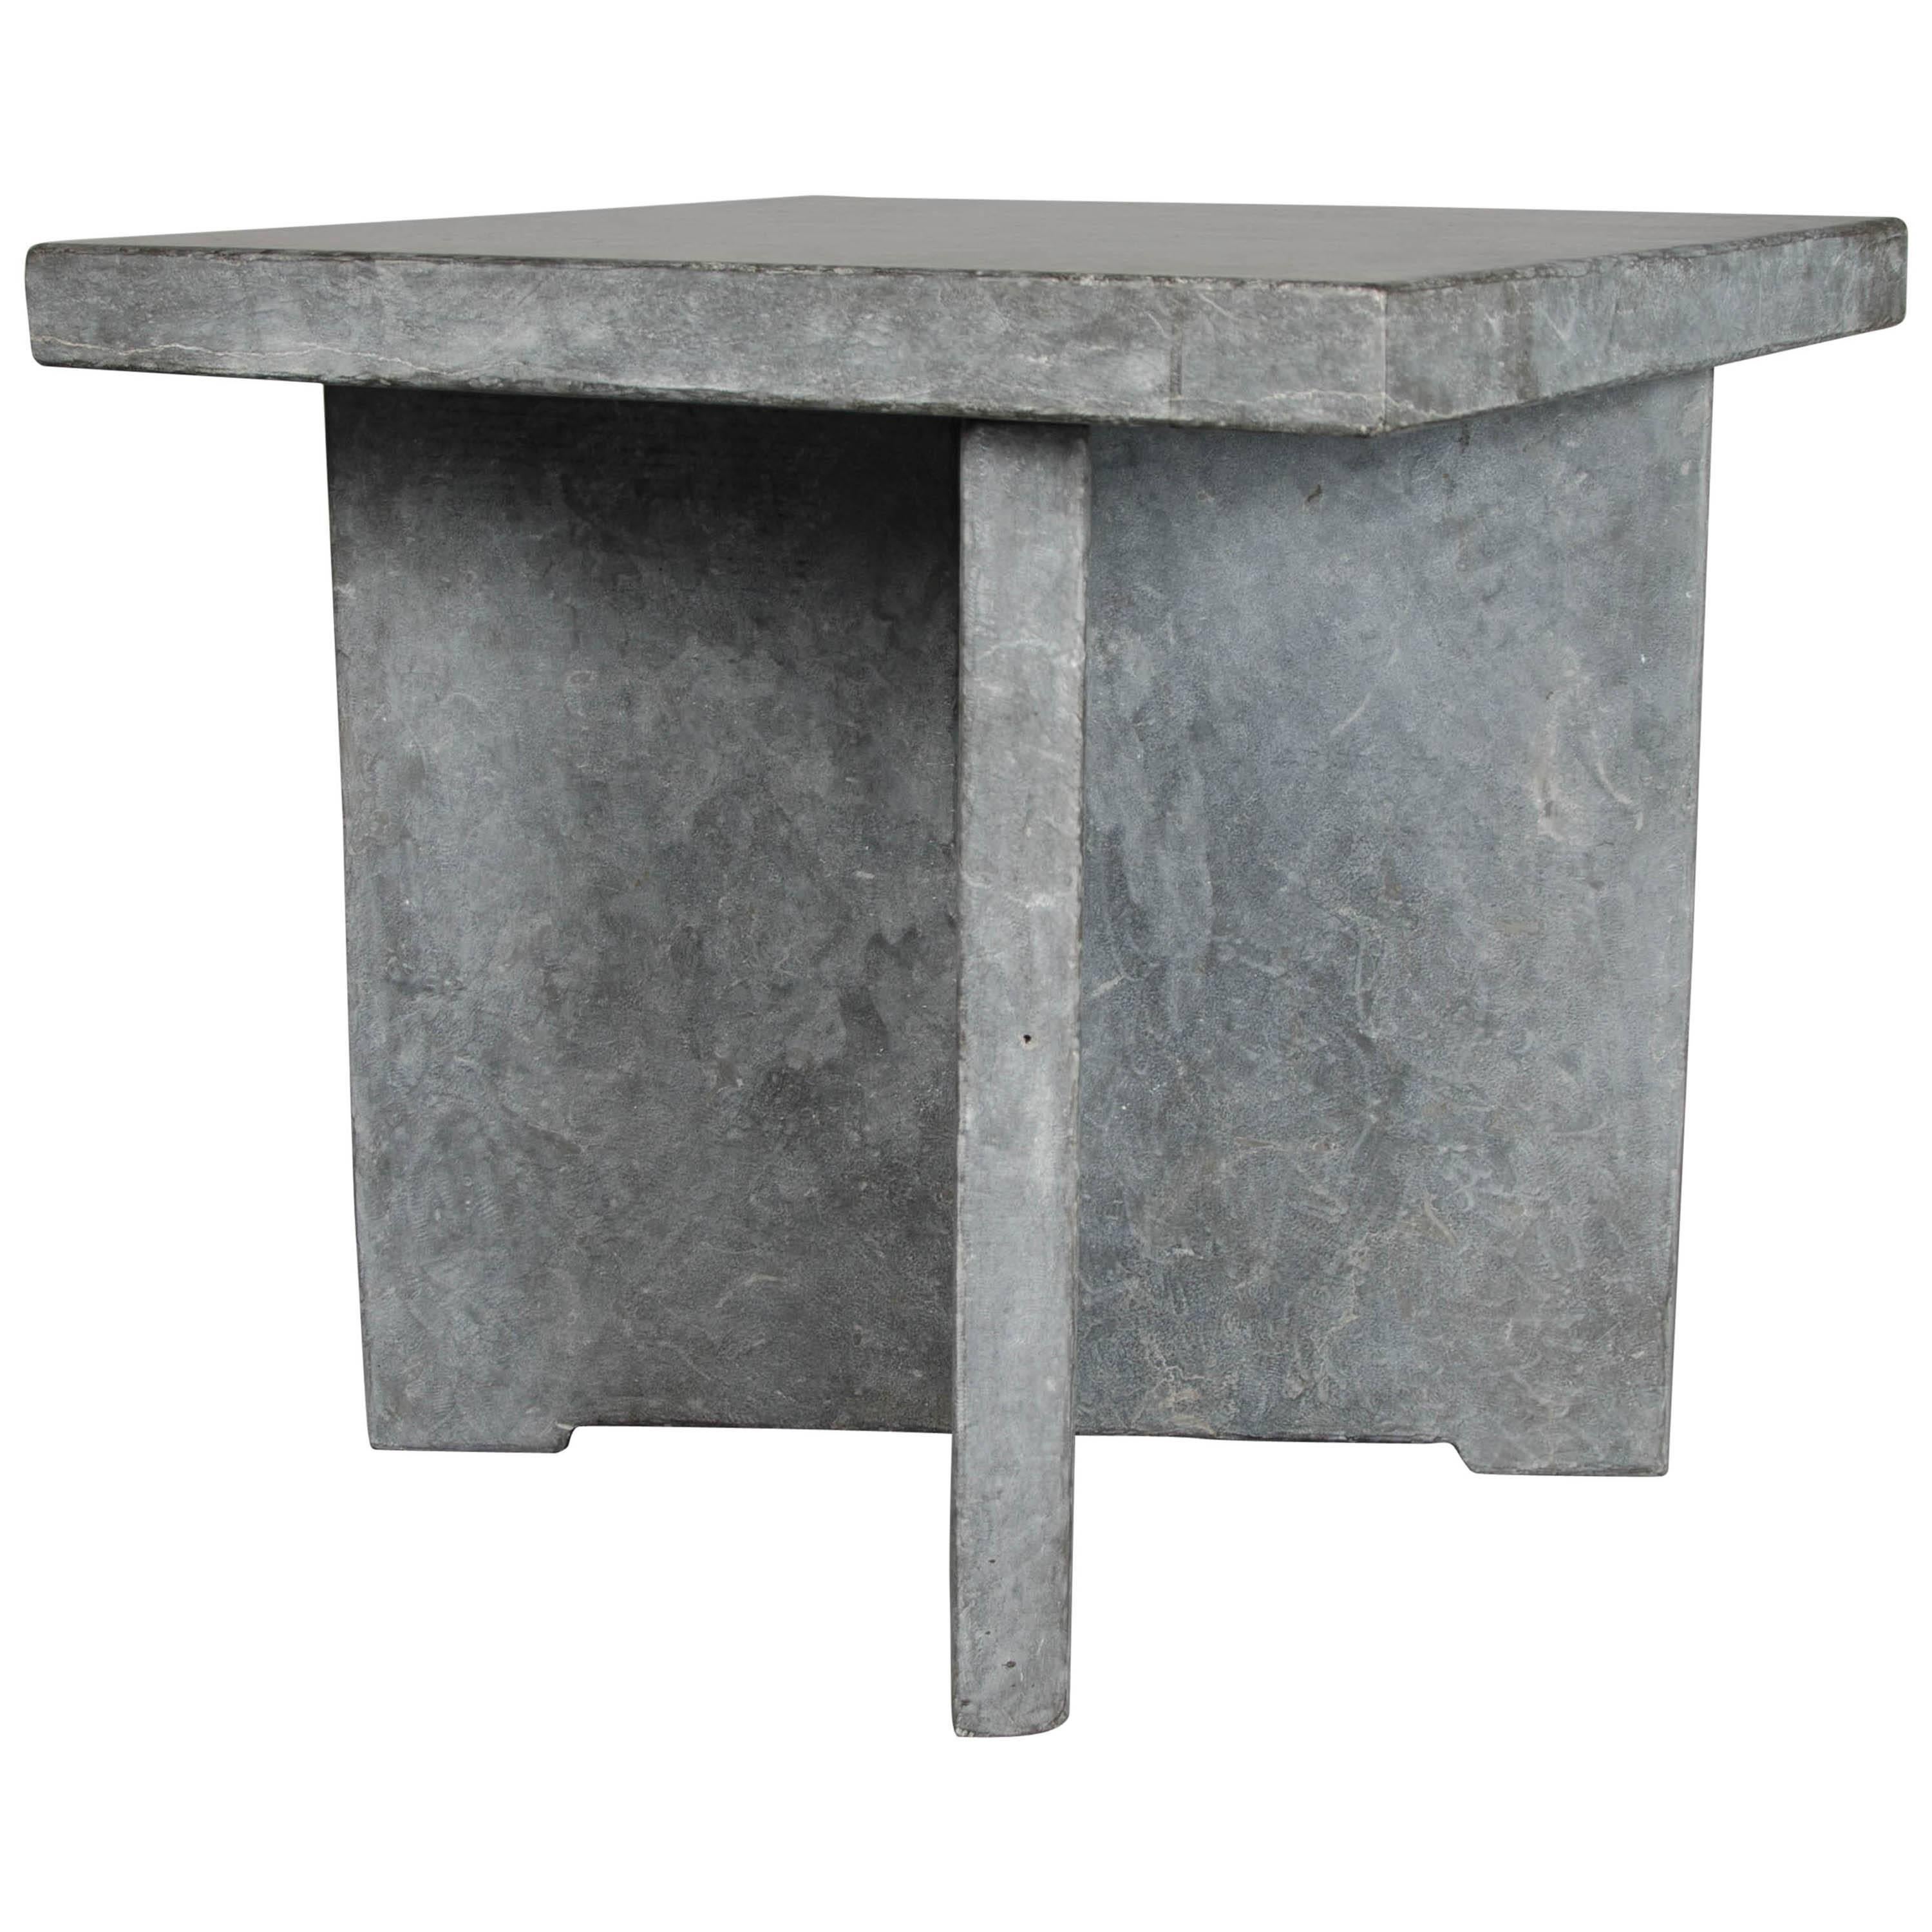 Stone Square Table (Black Stone) by Robert Kuo, Limited Edition